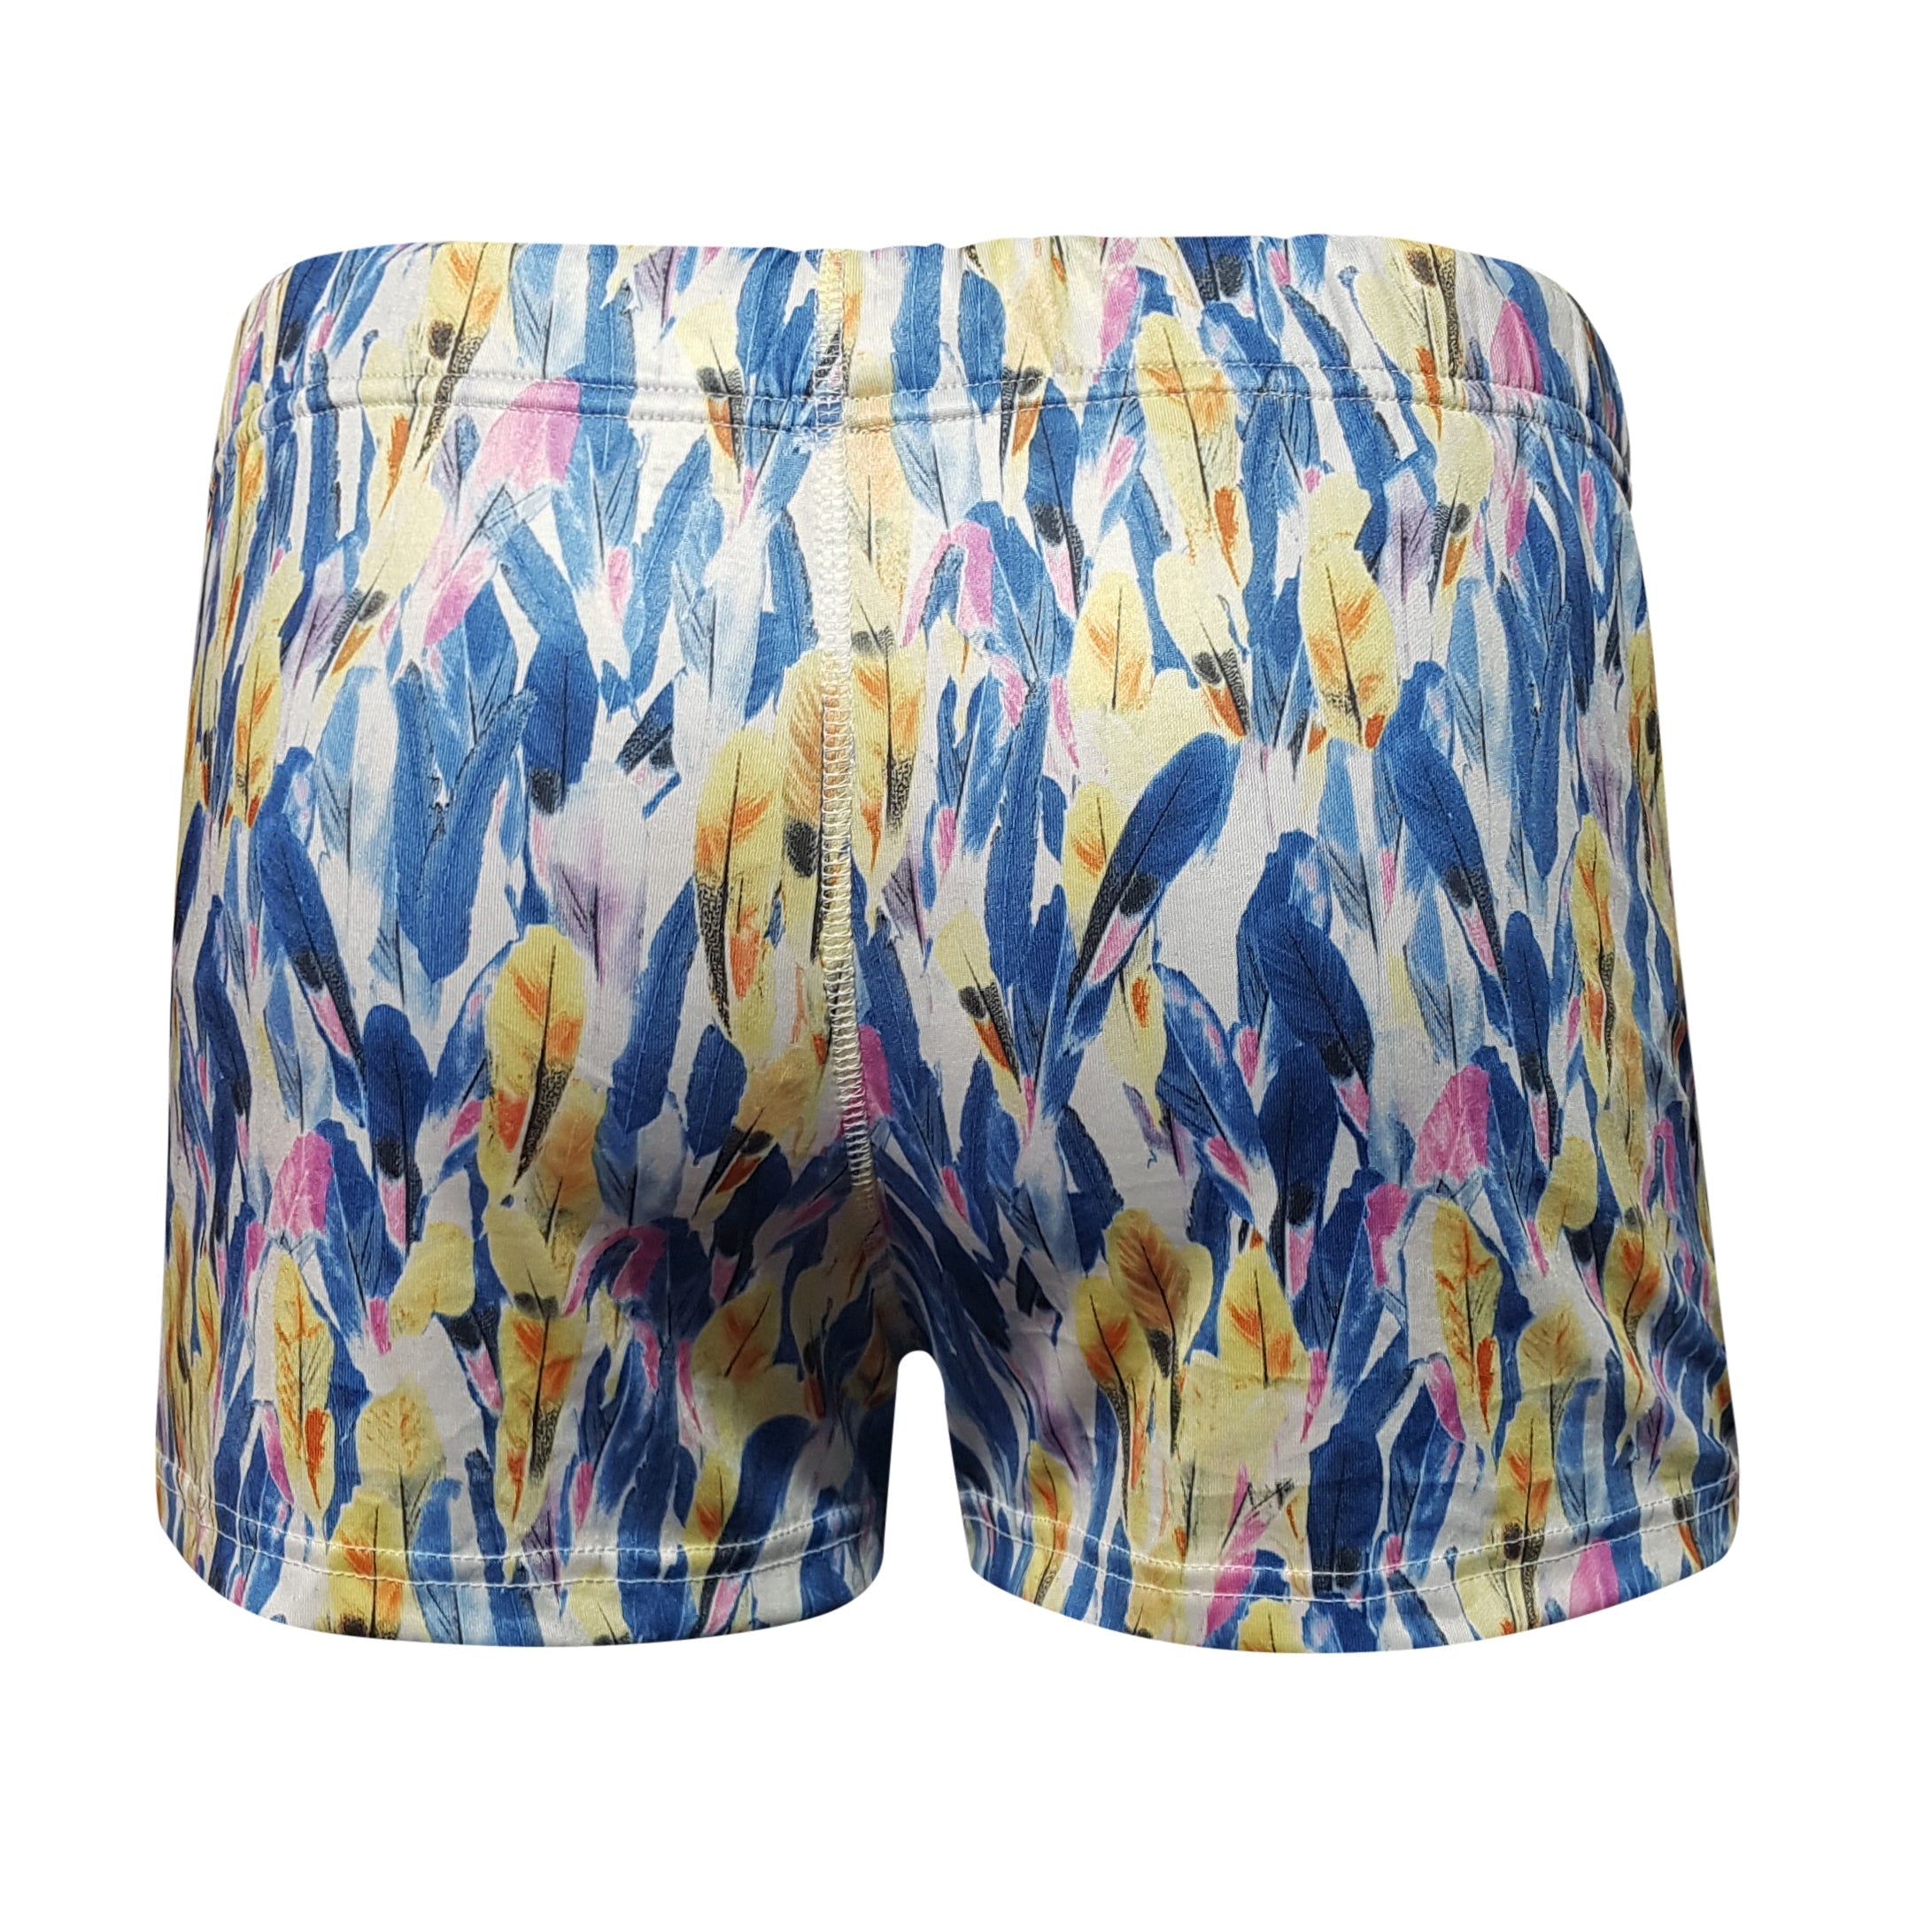 KINEO FEATHERED SWIM TRUNK - DealByEthan.gay